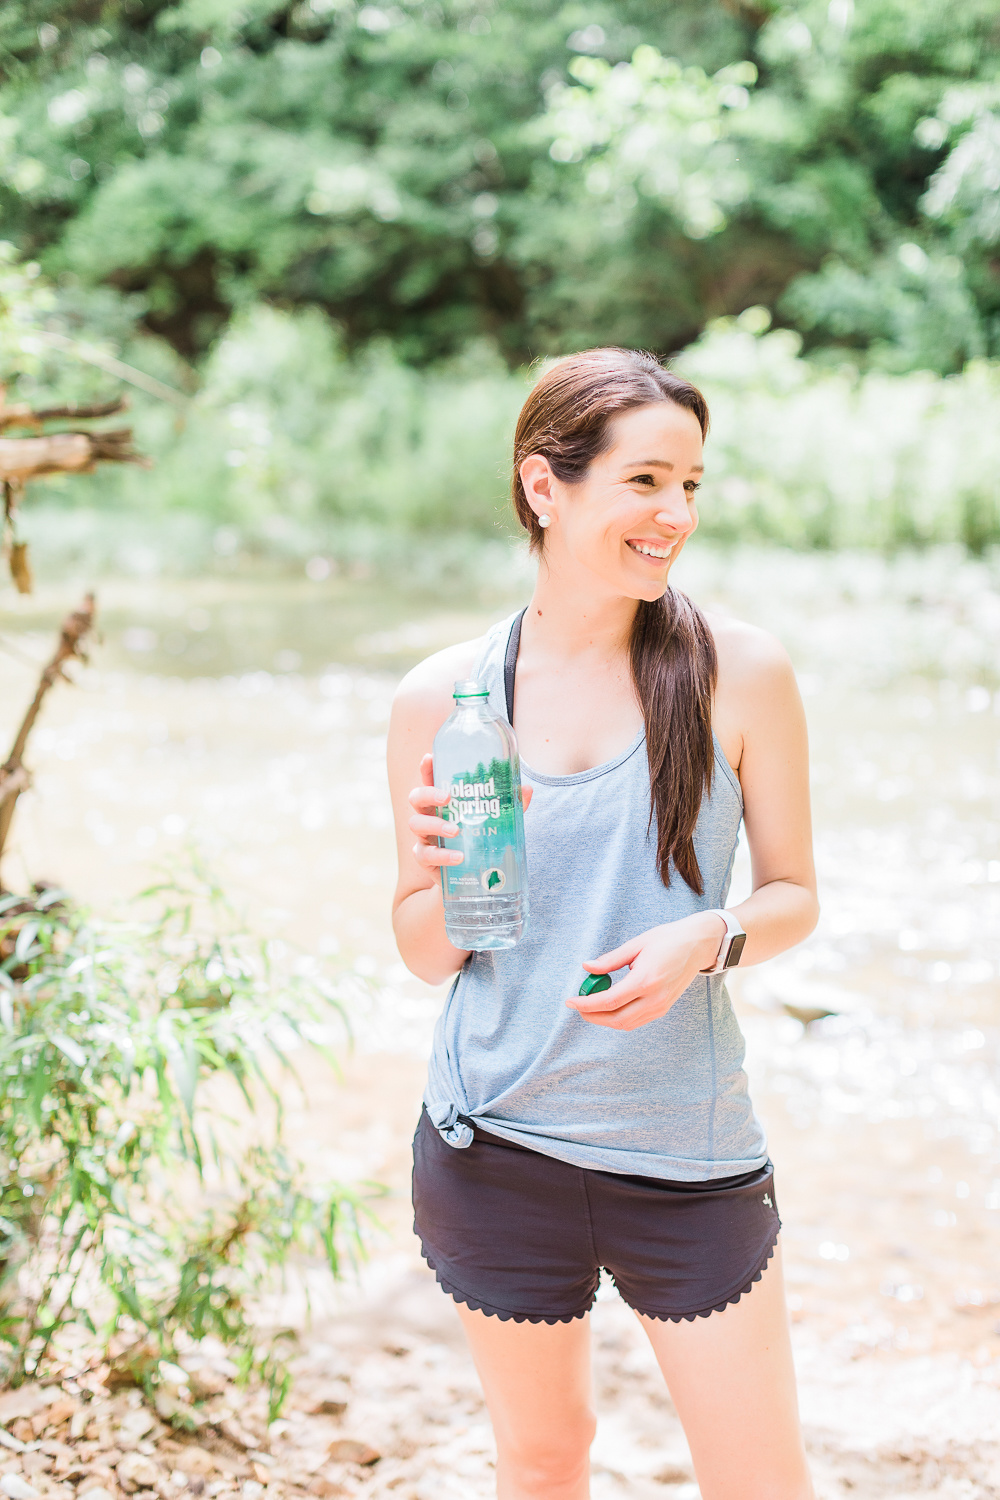 cute summer hiking outfit for women, Poland Spring Origin Natural Spring Water at Walmart, Summer Adventuring: How to Plan the Perfect Hiking Picnic by popular midwest blogger Stephanie Ziajka from Diary of a Debutante, Columbia MO hiking